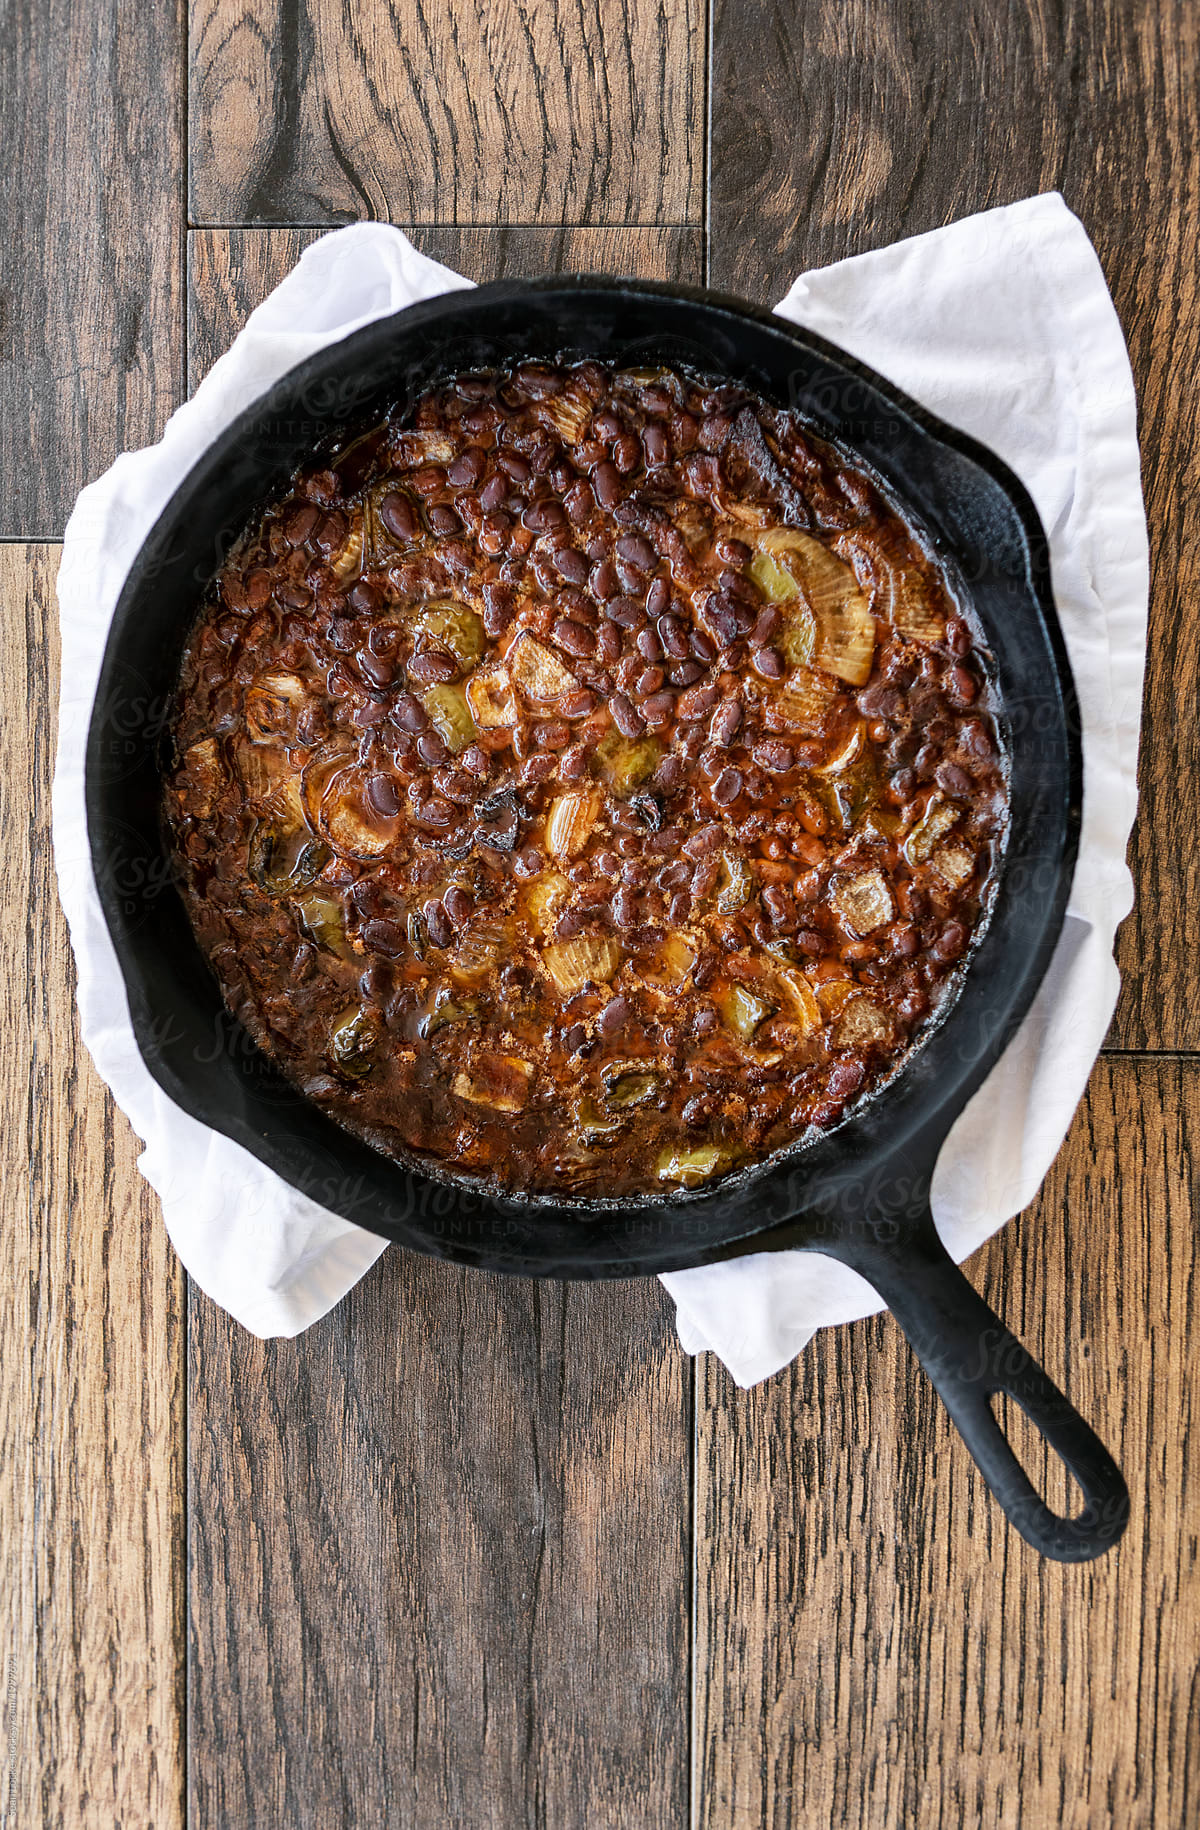 Smoked: Mesquite Baked Beans In A Cast Iron Pan